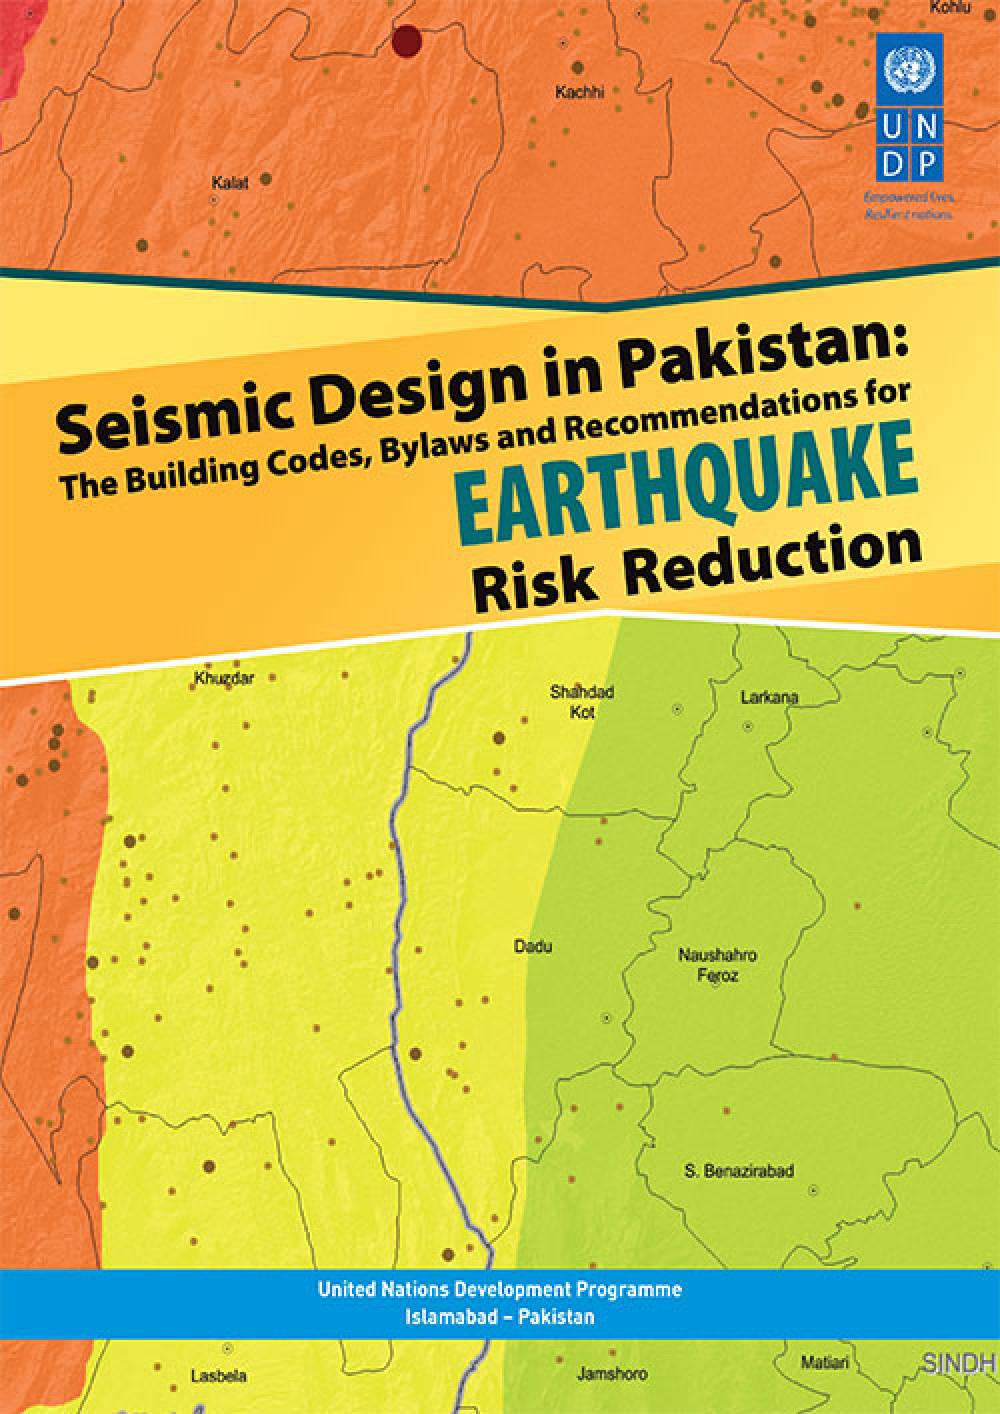 Seismic Design in Pakistan, The Building codes bylaws and Recommendations for Earthquake Risk Reduction